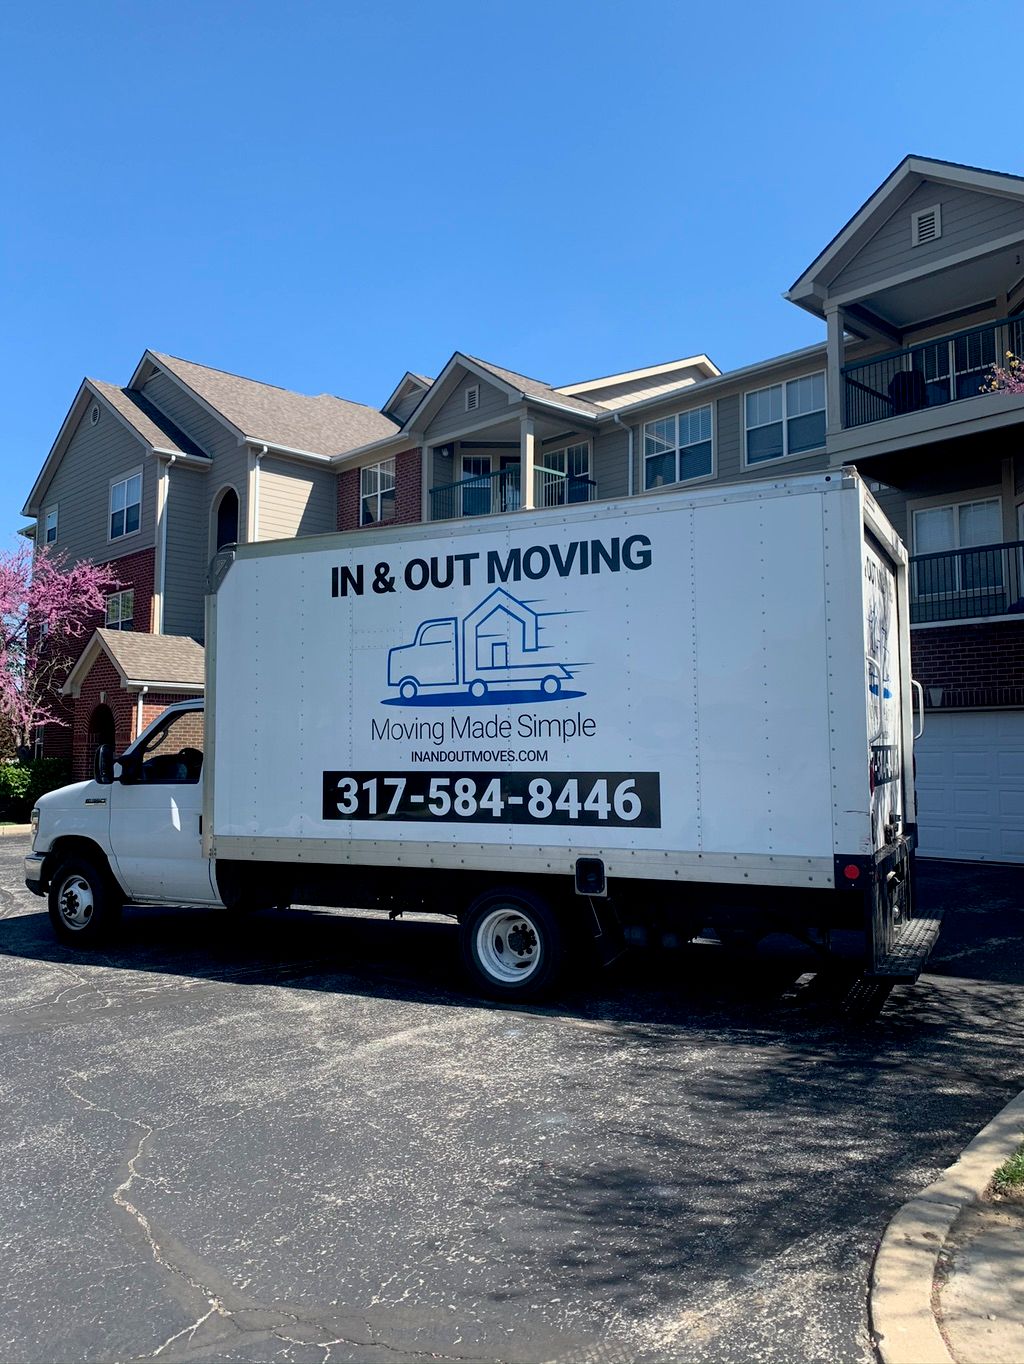 In & Out Moving